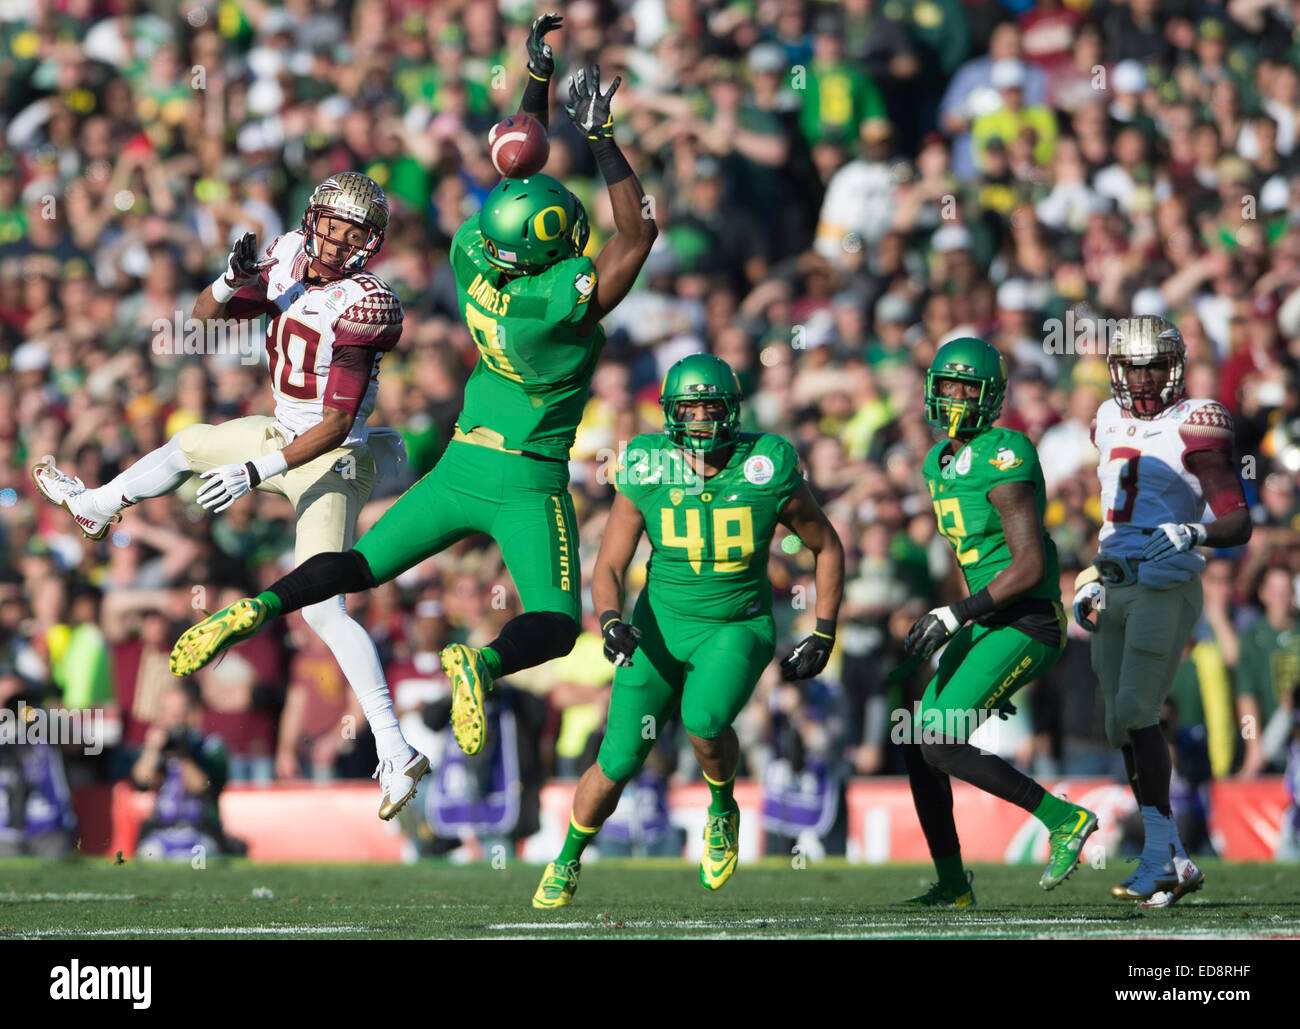 Los Angeles, USA. 1st Jan, 2015. Reggie Daniels (2nd L) of the Oregon Ducks fails to catch the ball during the 2015 Rose Bowl college football game against the Florida State Seminoles at Rose Bowl in Los Angeles, the United States, Jan. 1, 2015. Oregon Ducks won the game 59-20. Credit:  Yang Lei/Xinhua/Alamy Live News Stock Photo